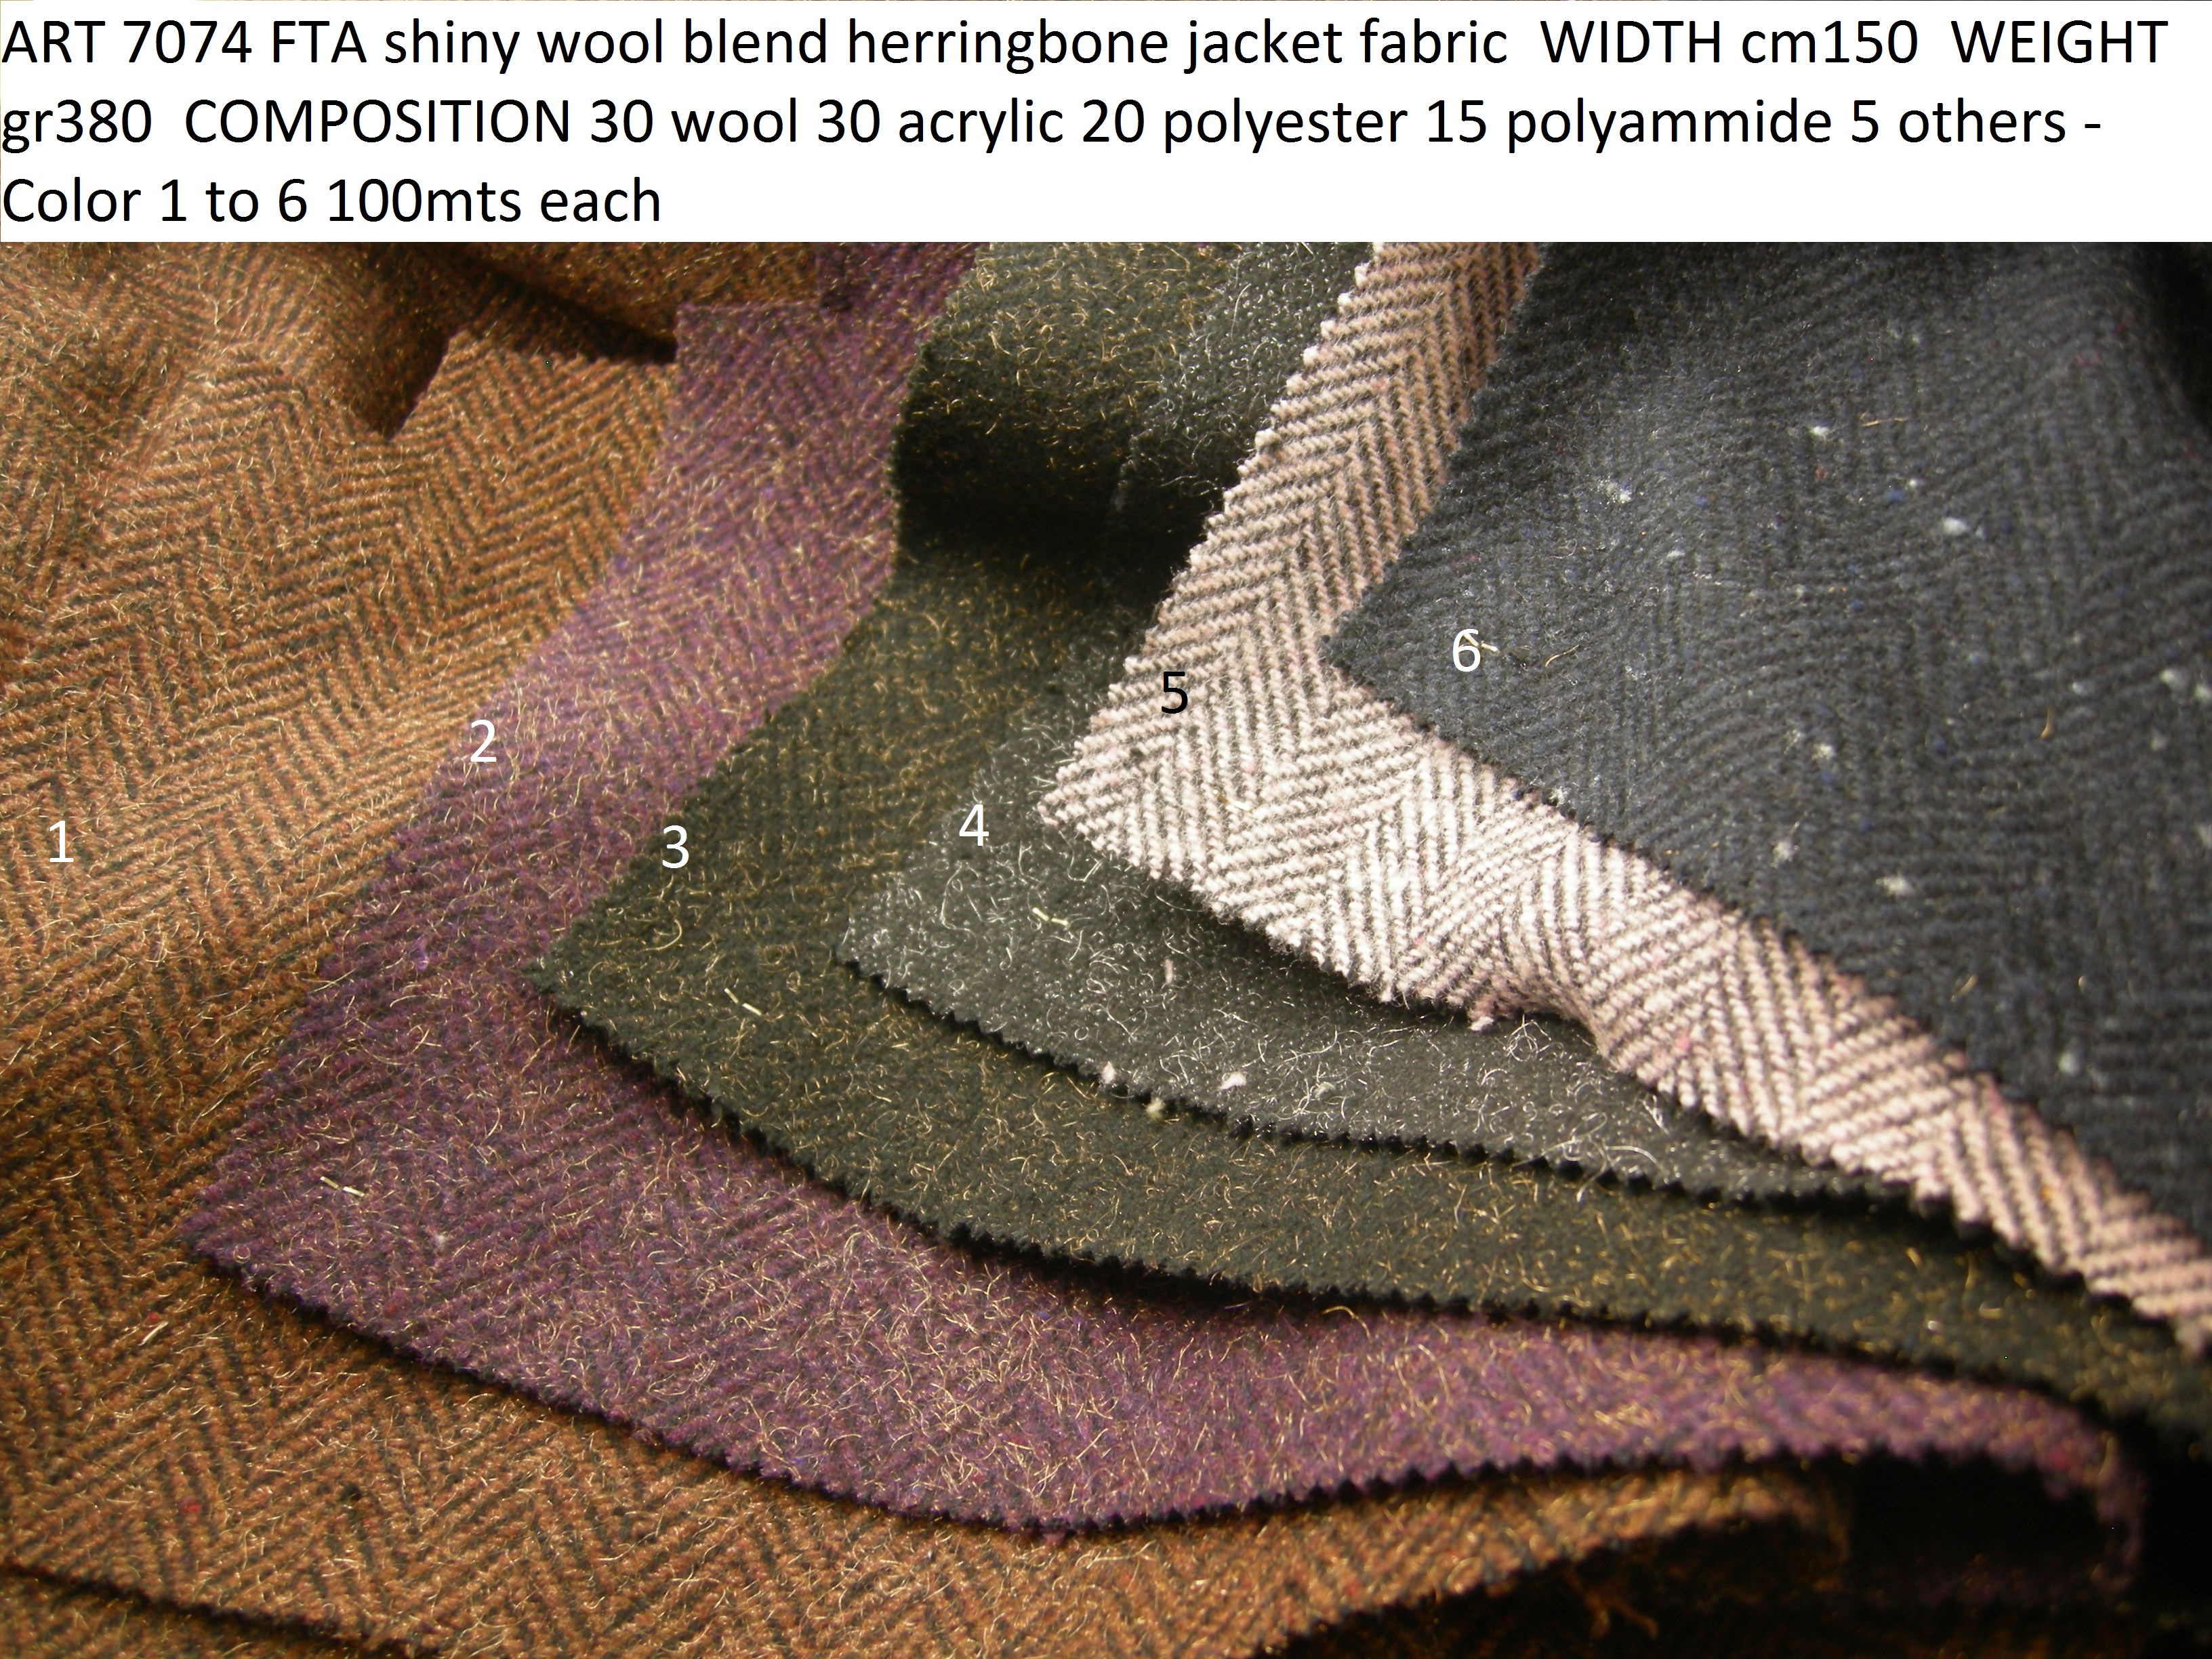 ART 7074 FTA shiny wool blend herringbone jacket fabric WIDTH cm150 WEIGHT gr380 COMPOSITION 30 wool 30 acrylic 20 polyester 15 polyammide 5 others - Color 1 to 6 100mts each